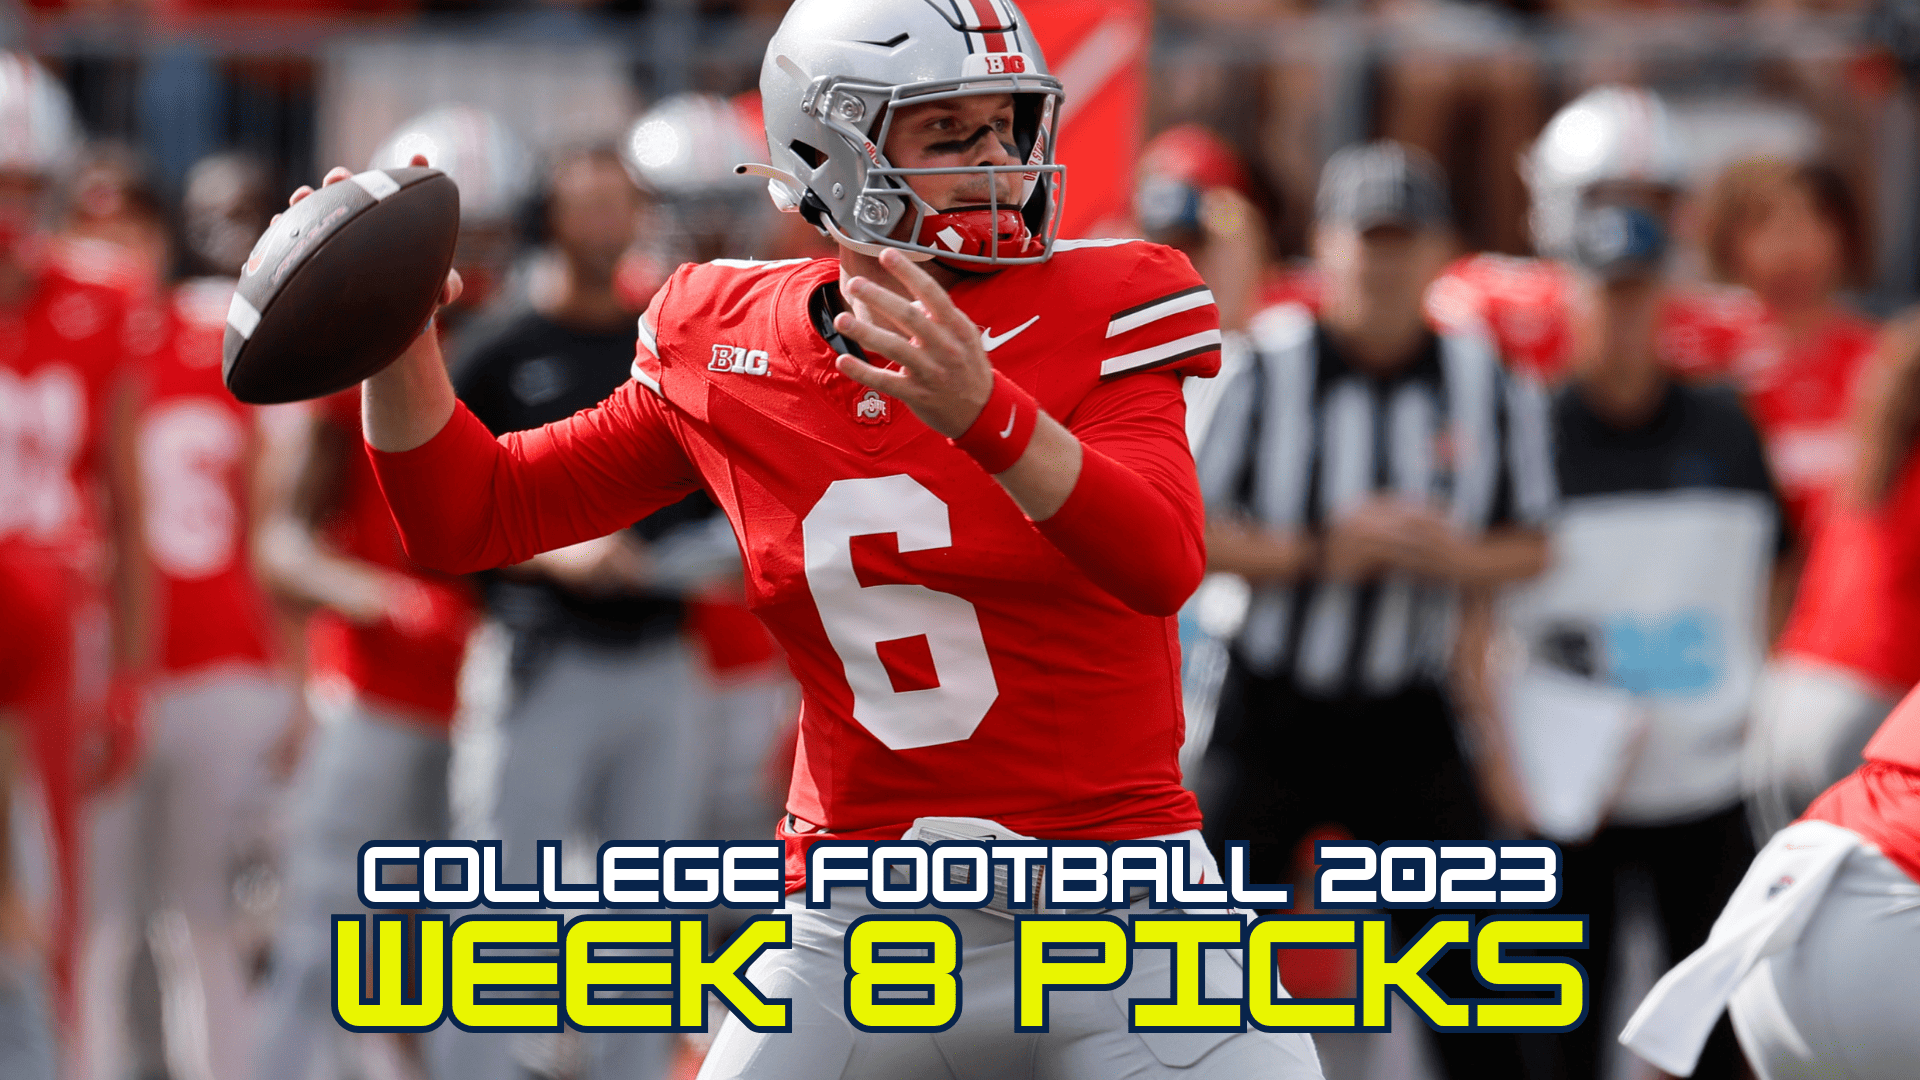 Our top college football Week 7 predictions include a Middle Tennessee-Liberty pick, as well as a Penn State-Ohio State pick with more...